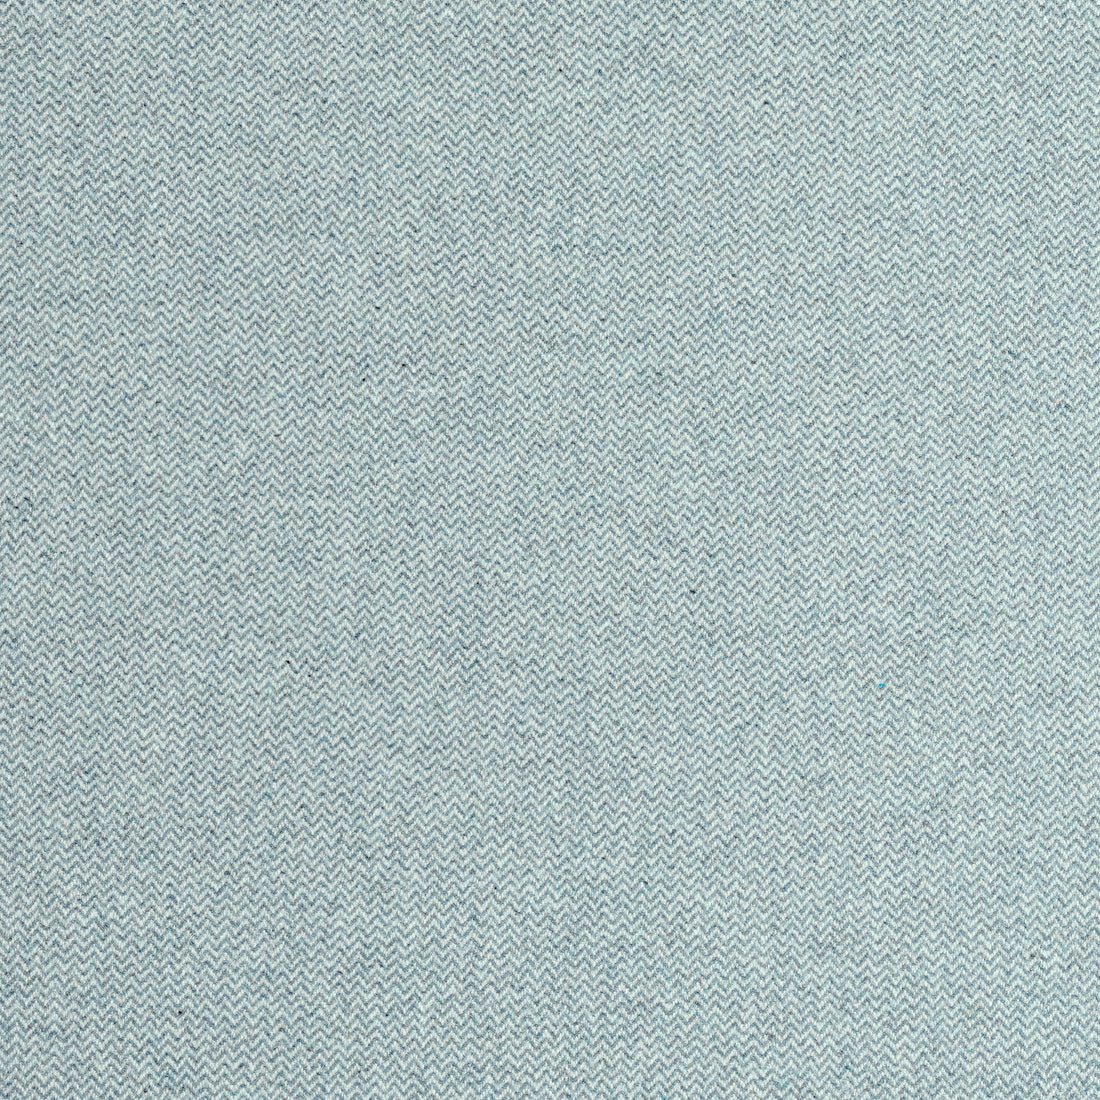 Dorset fabric in slate color - pattern number W80910 - by Thibaut in the Dunmore collection